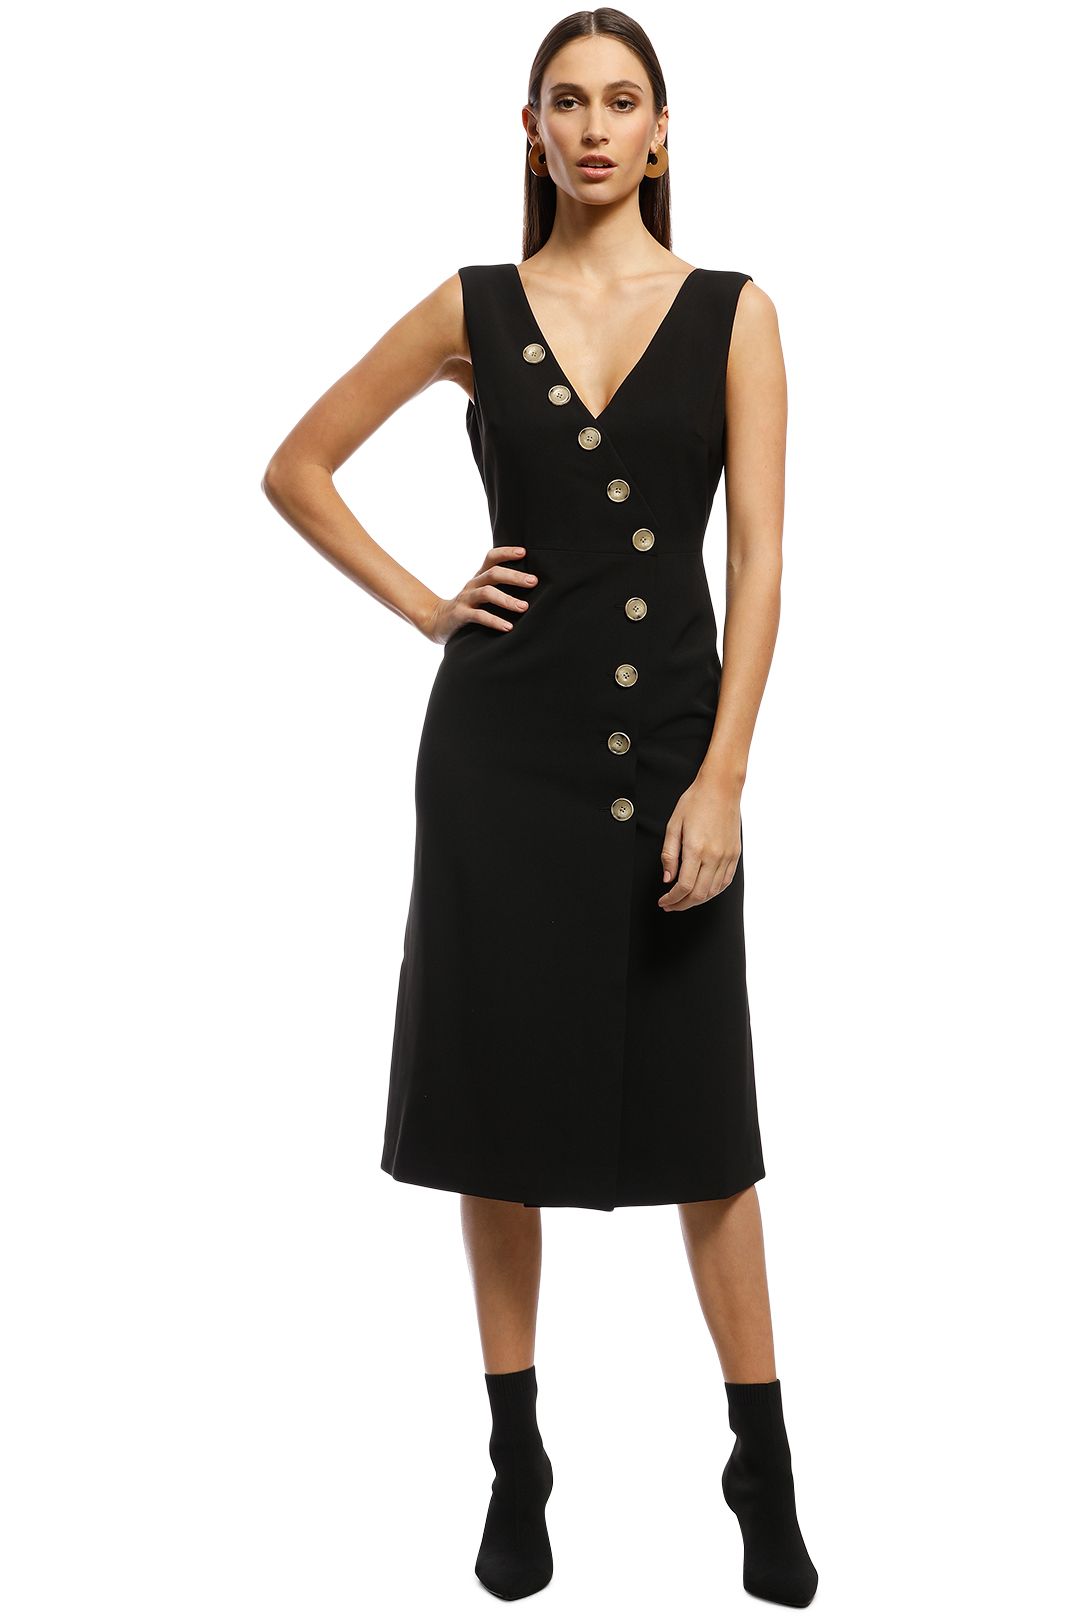 Friend of Audrey - Dylan Buttoned Dress - Black - Front